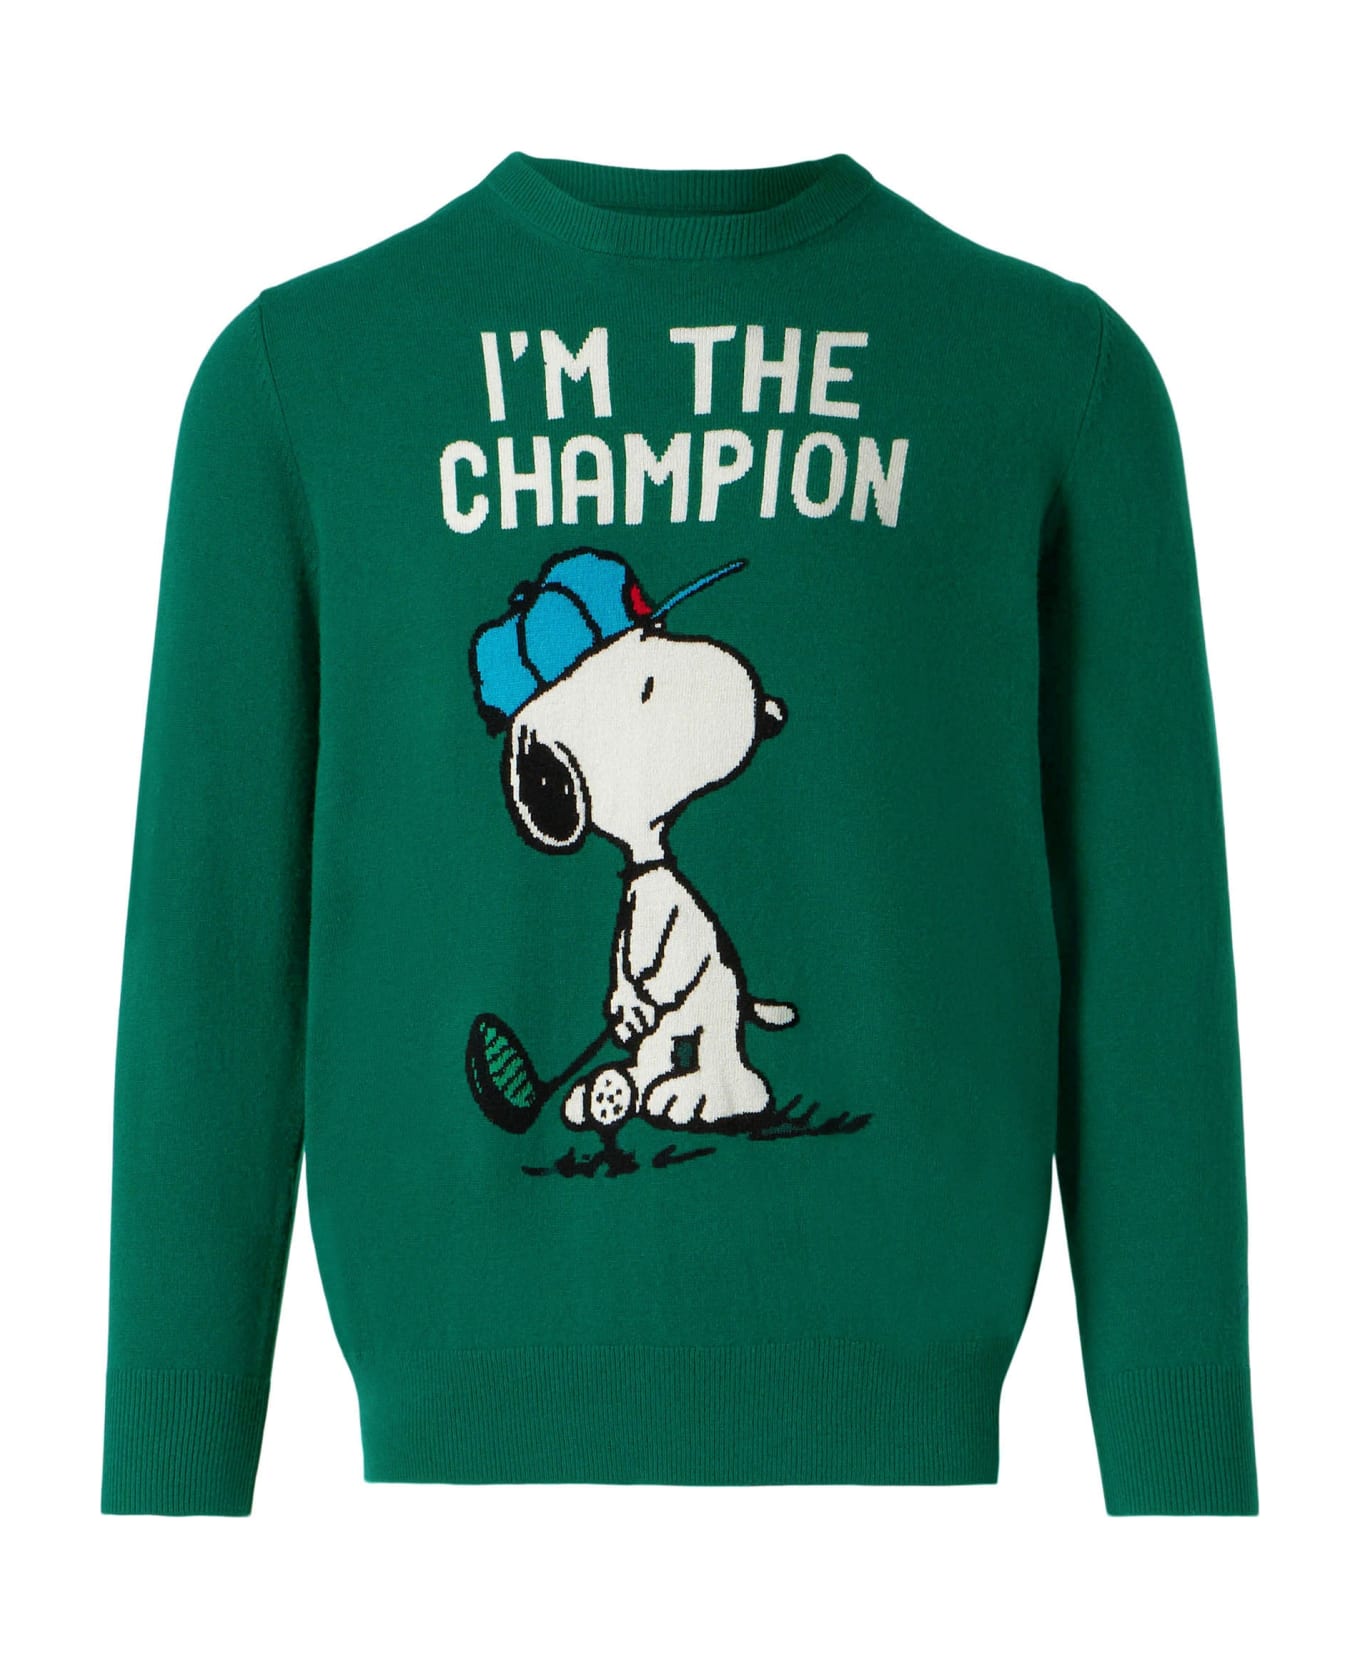 MC2 Saint Barth Man Lightweight Sweater With Snoopy Jacquard Print | Snoopy Peanuts Special Edition - GREEN